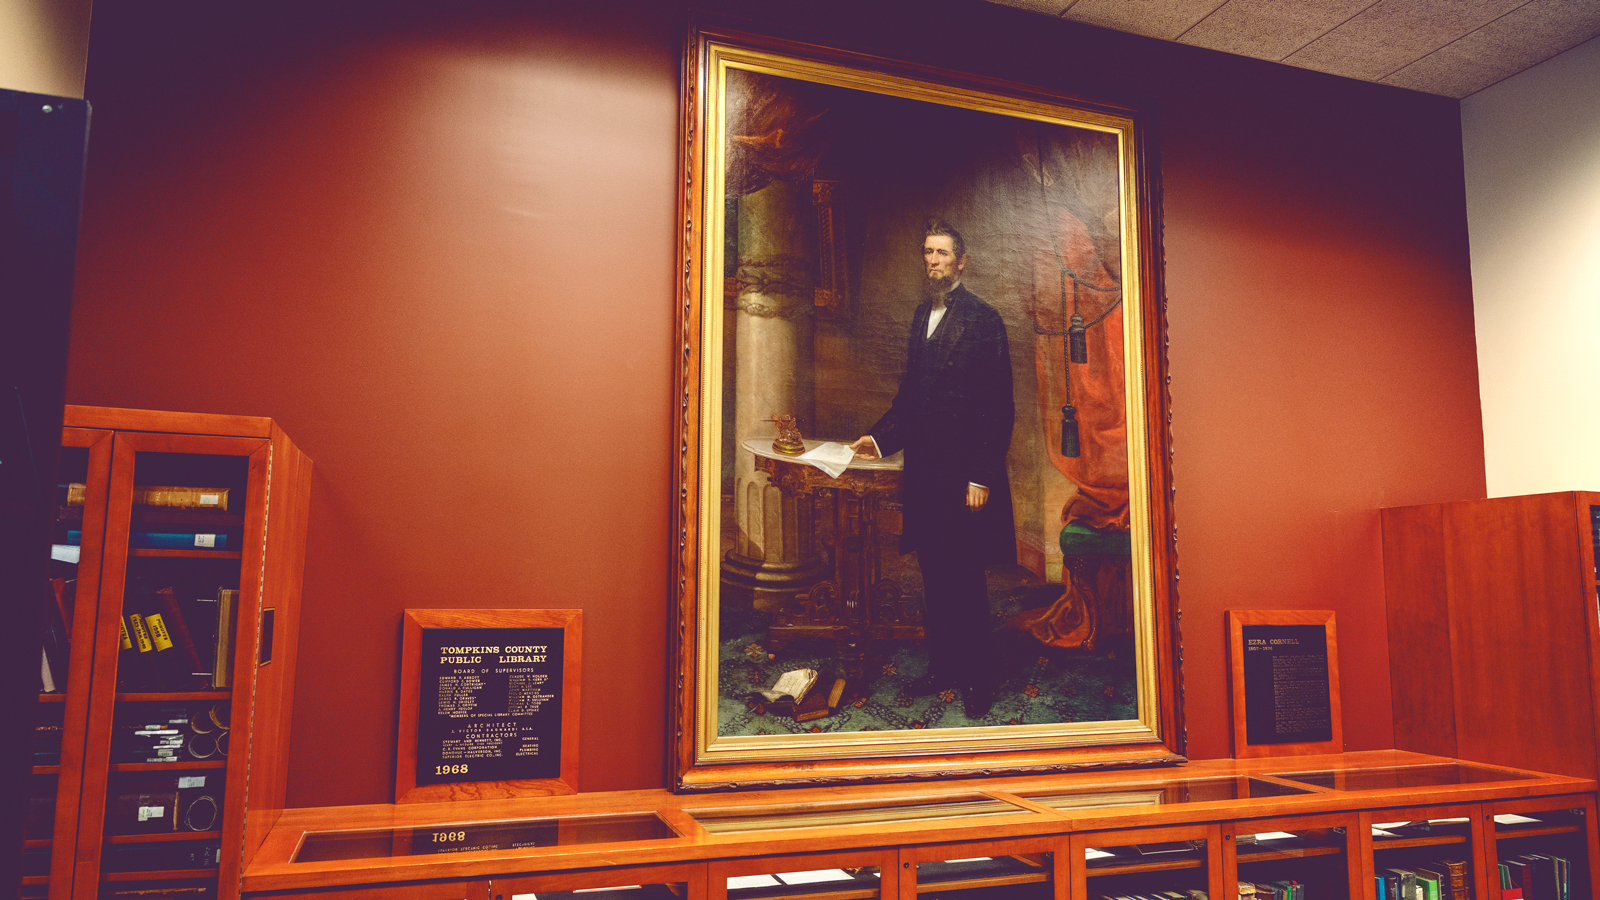 This portrait of Ezra Cornell, painted in the 1860s, hangs in the Tompkins County Public Library